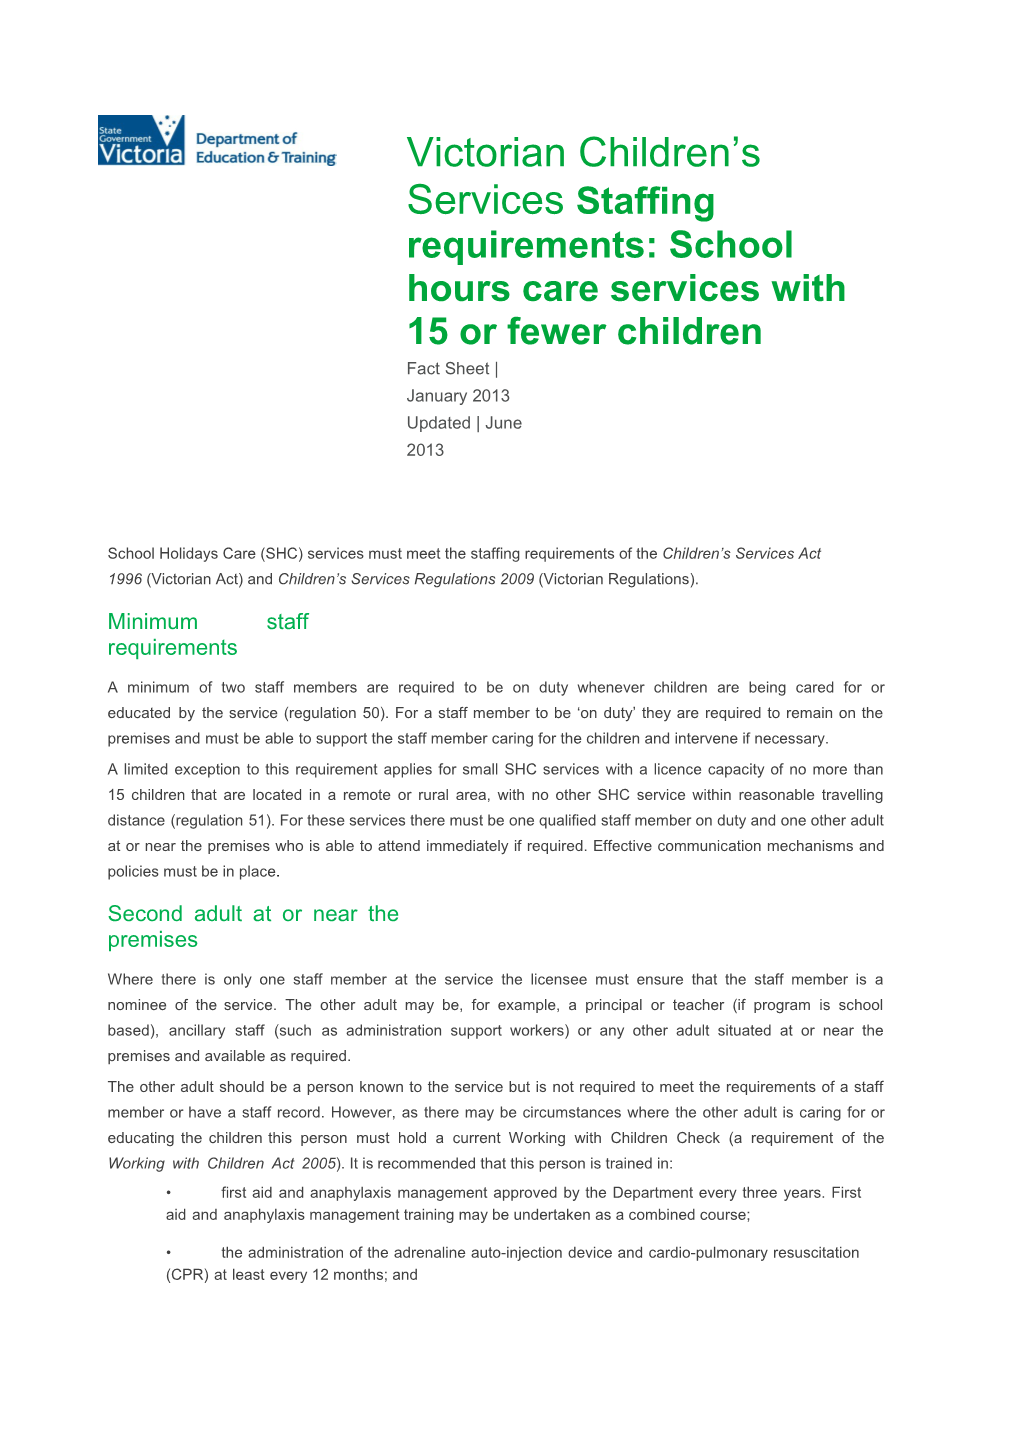 Victorian Children's Services - Staffing Requirements: School Hours Care Services With